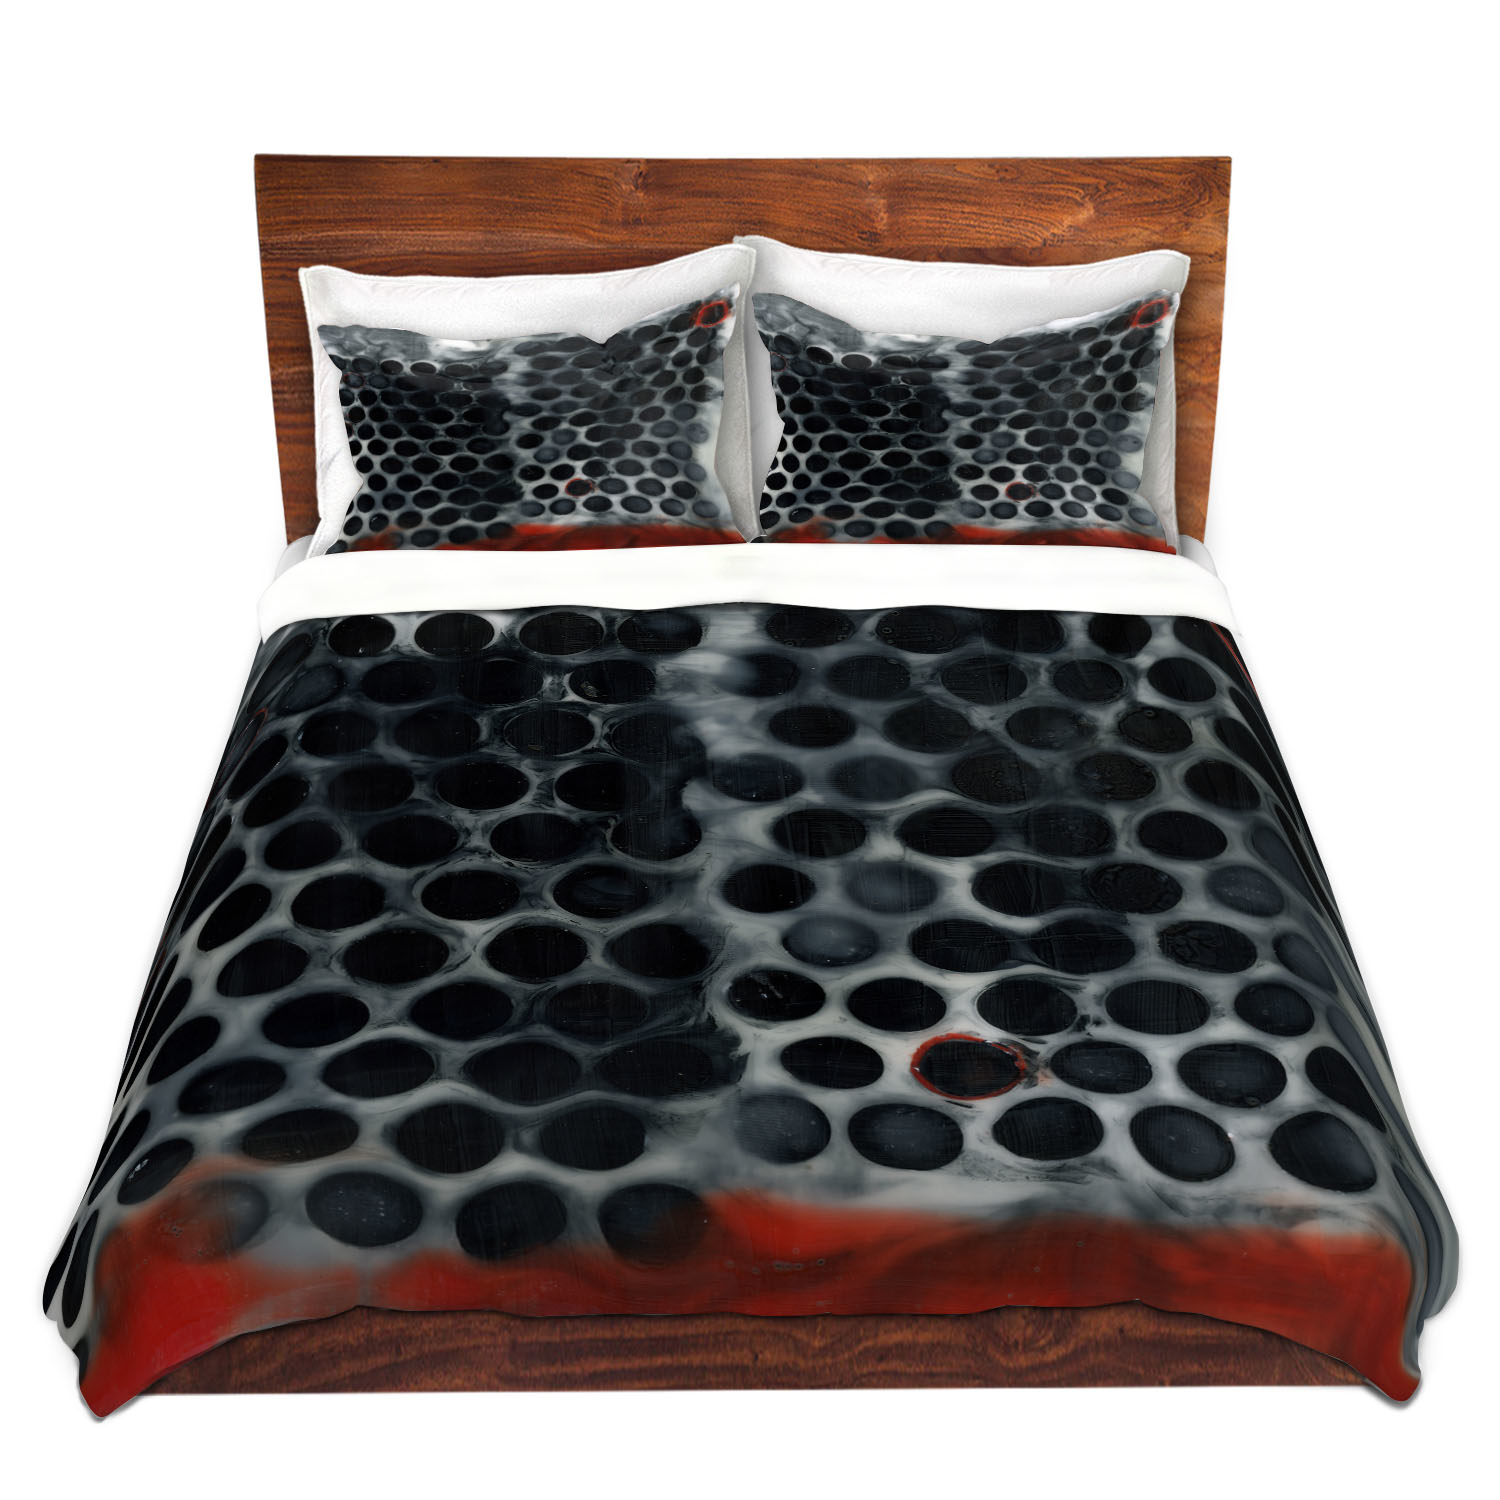 Dianoche Microfiber Duvet Covers By Dora Ficher - Not Always Black Or White 11